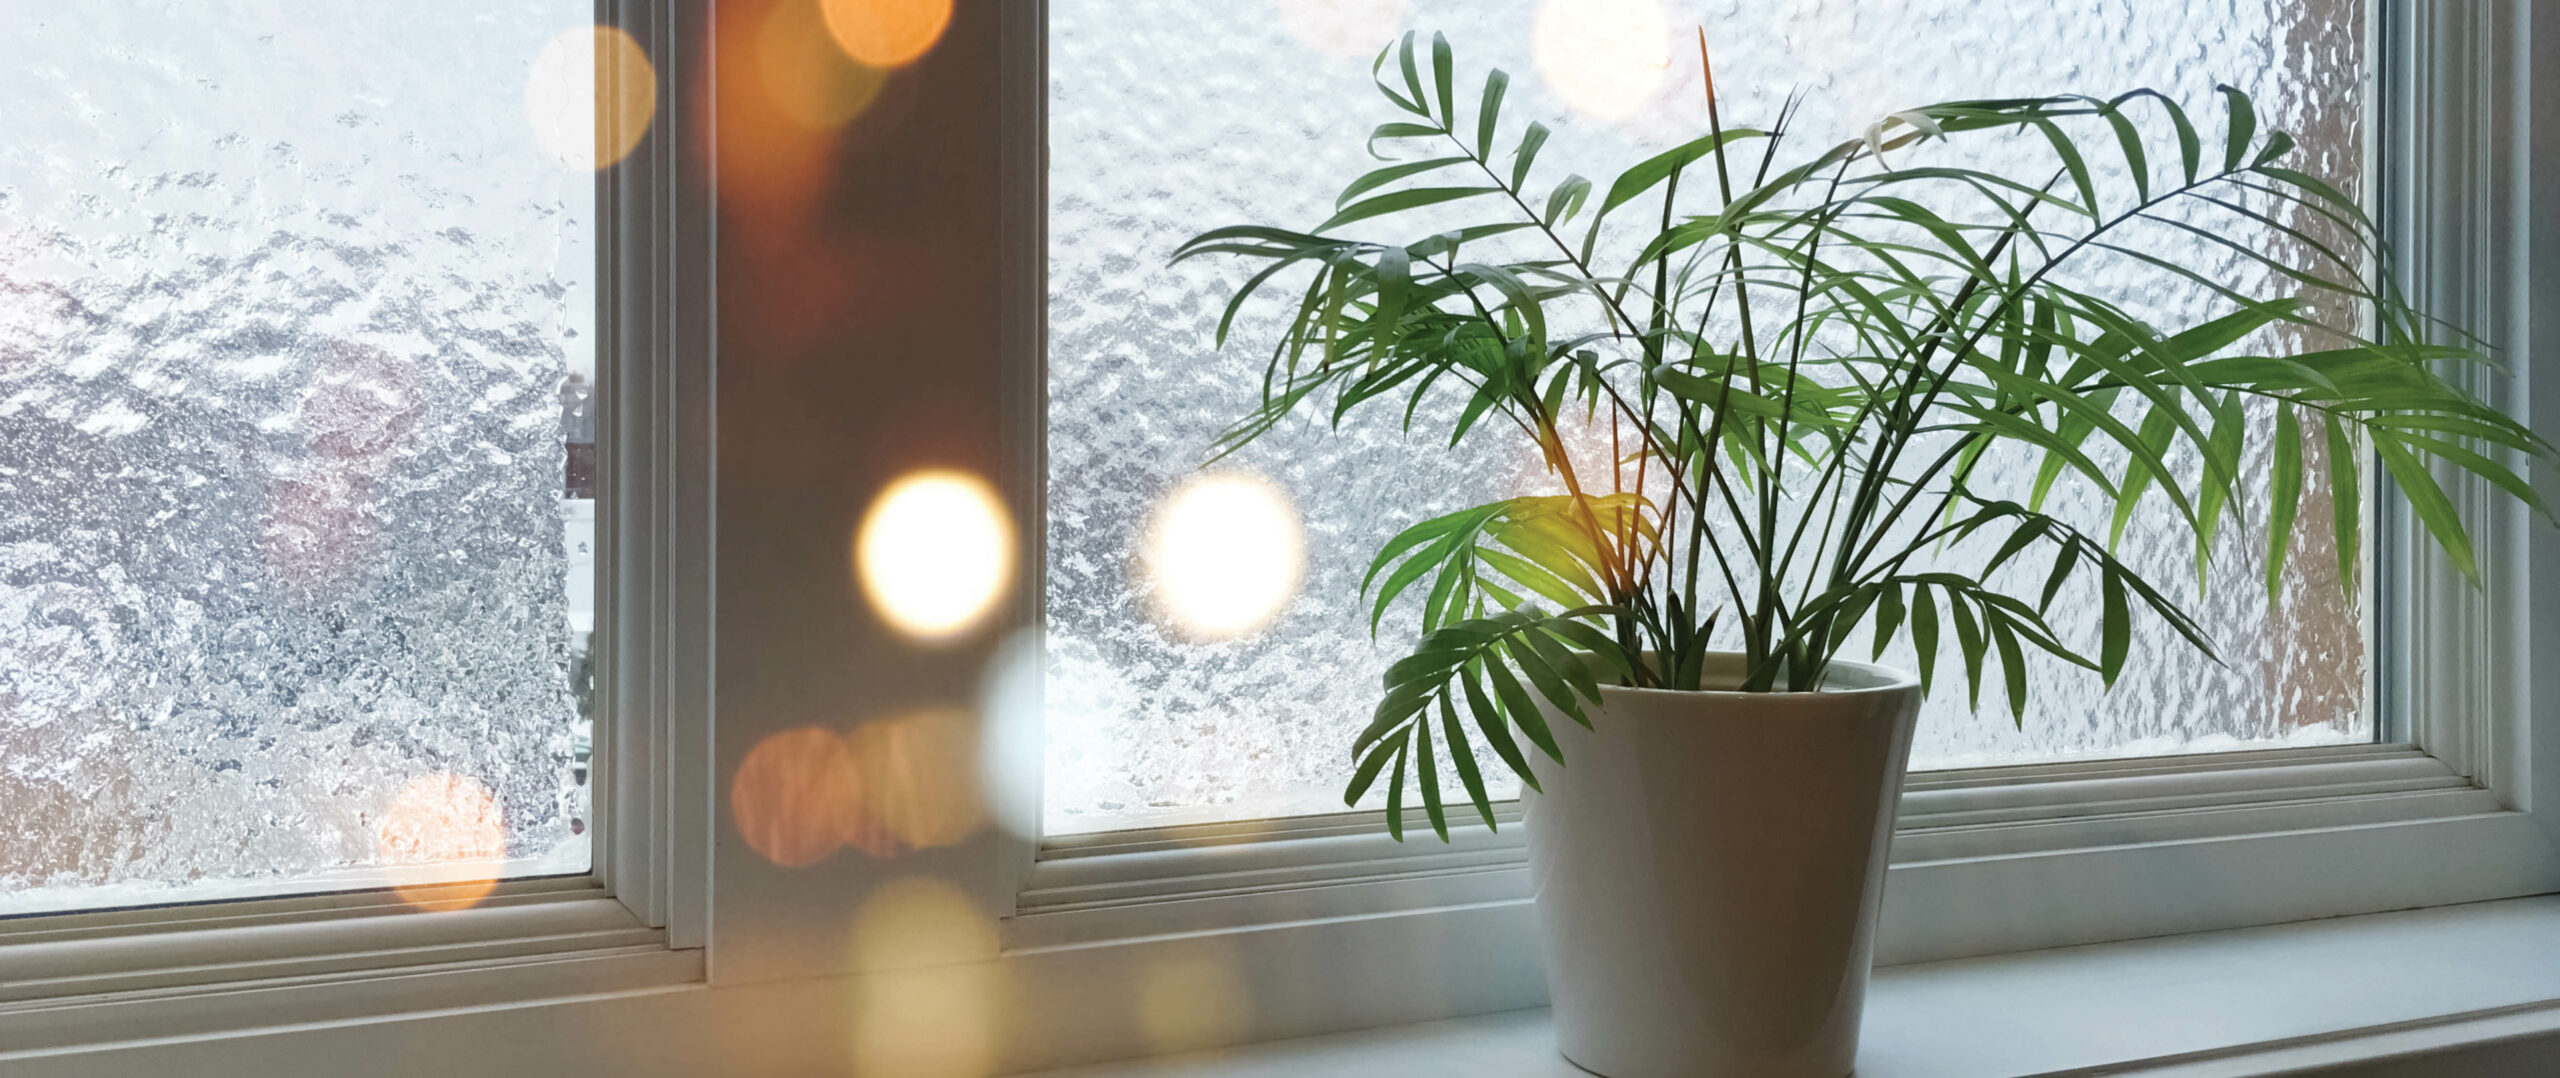 Tips For Caring For Your Houseplants During The Winter